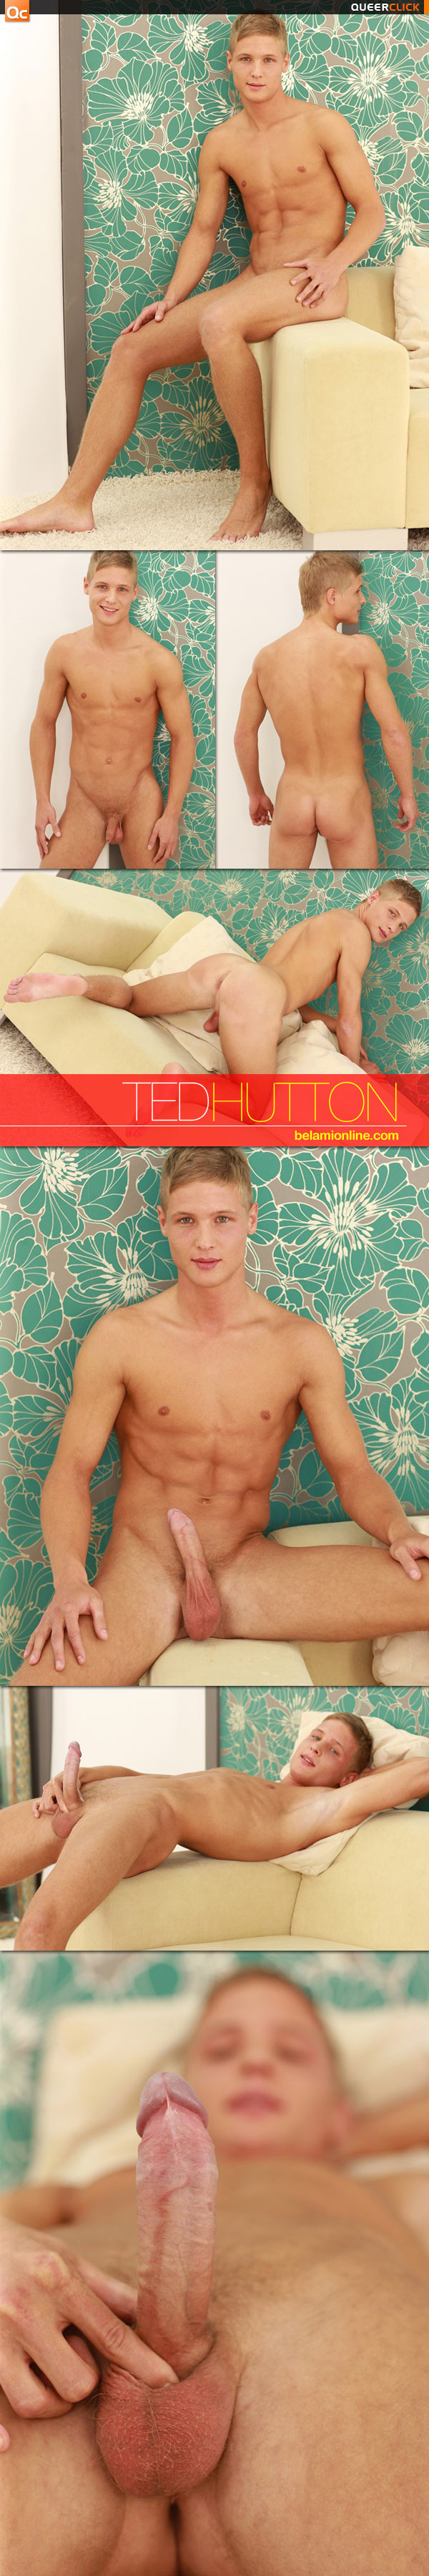 Bel Ami: Ted Hutton